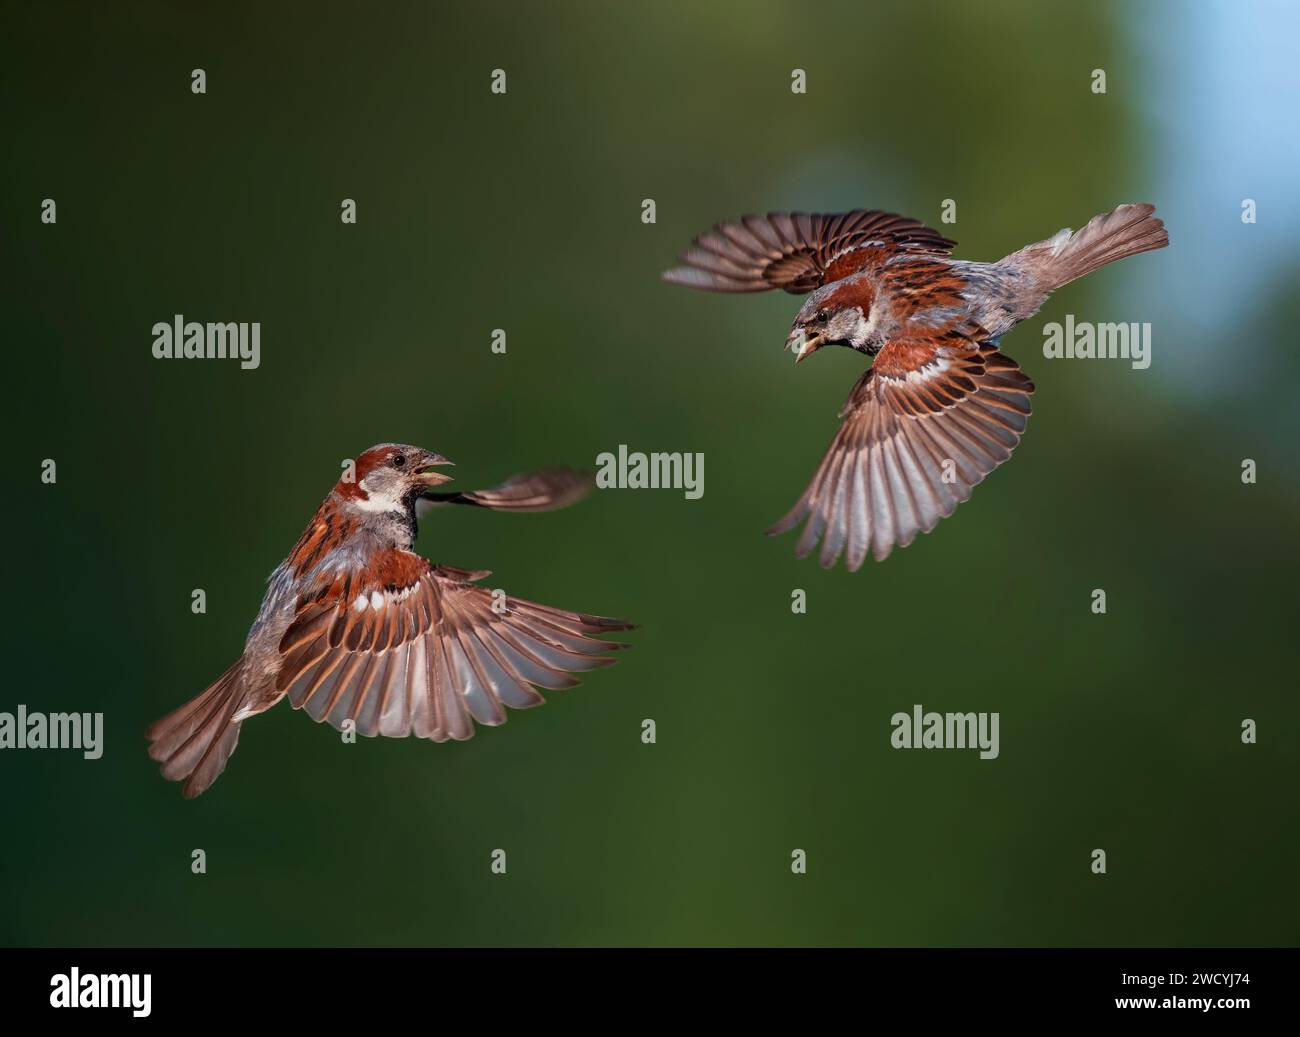 two sparrow birds fly towards each other spreading their feathers and wings against the backdrop of a green spring garden Stock Photo